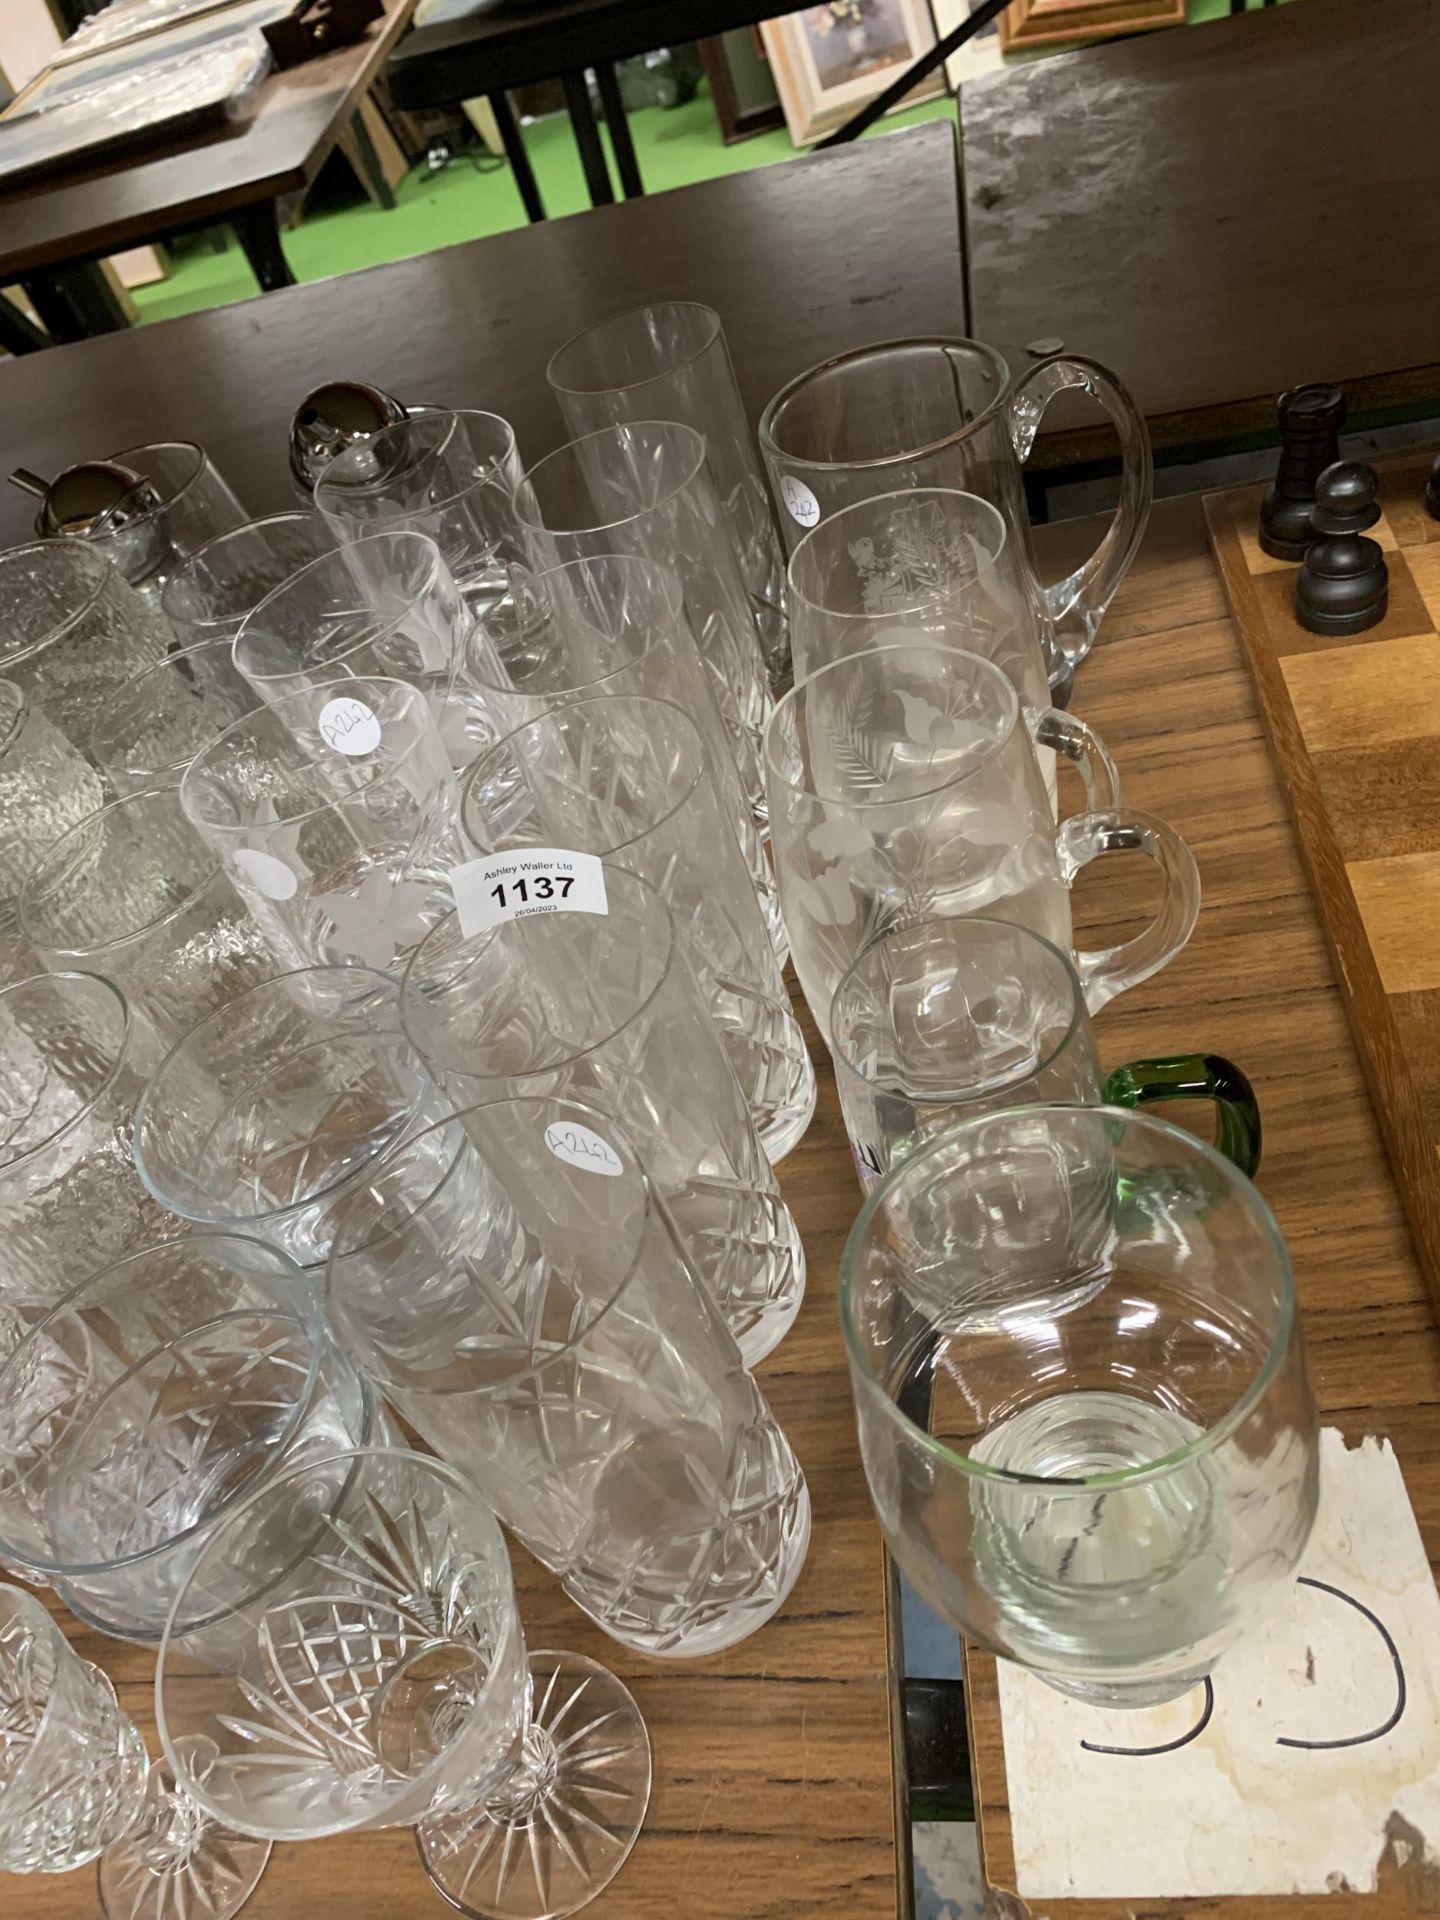 A LARGE QUANTITY OF GLASSES TO INCLUDE TUMBLERS, WINE, SHERRY, DESSERT BOWLS, WINE POURERS, ETC - Image 4 of 4